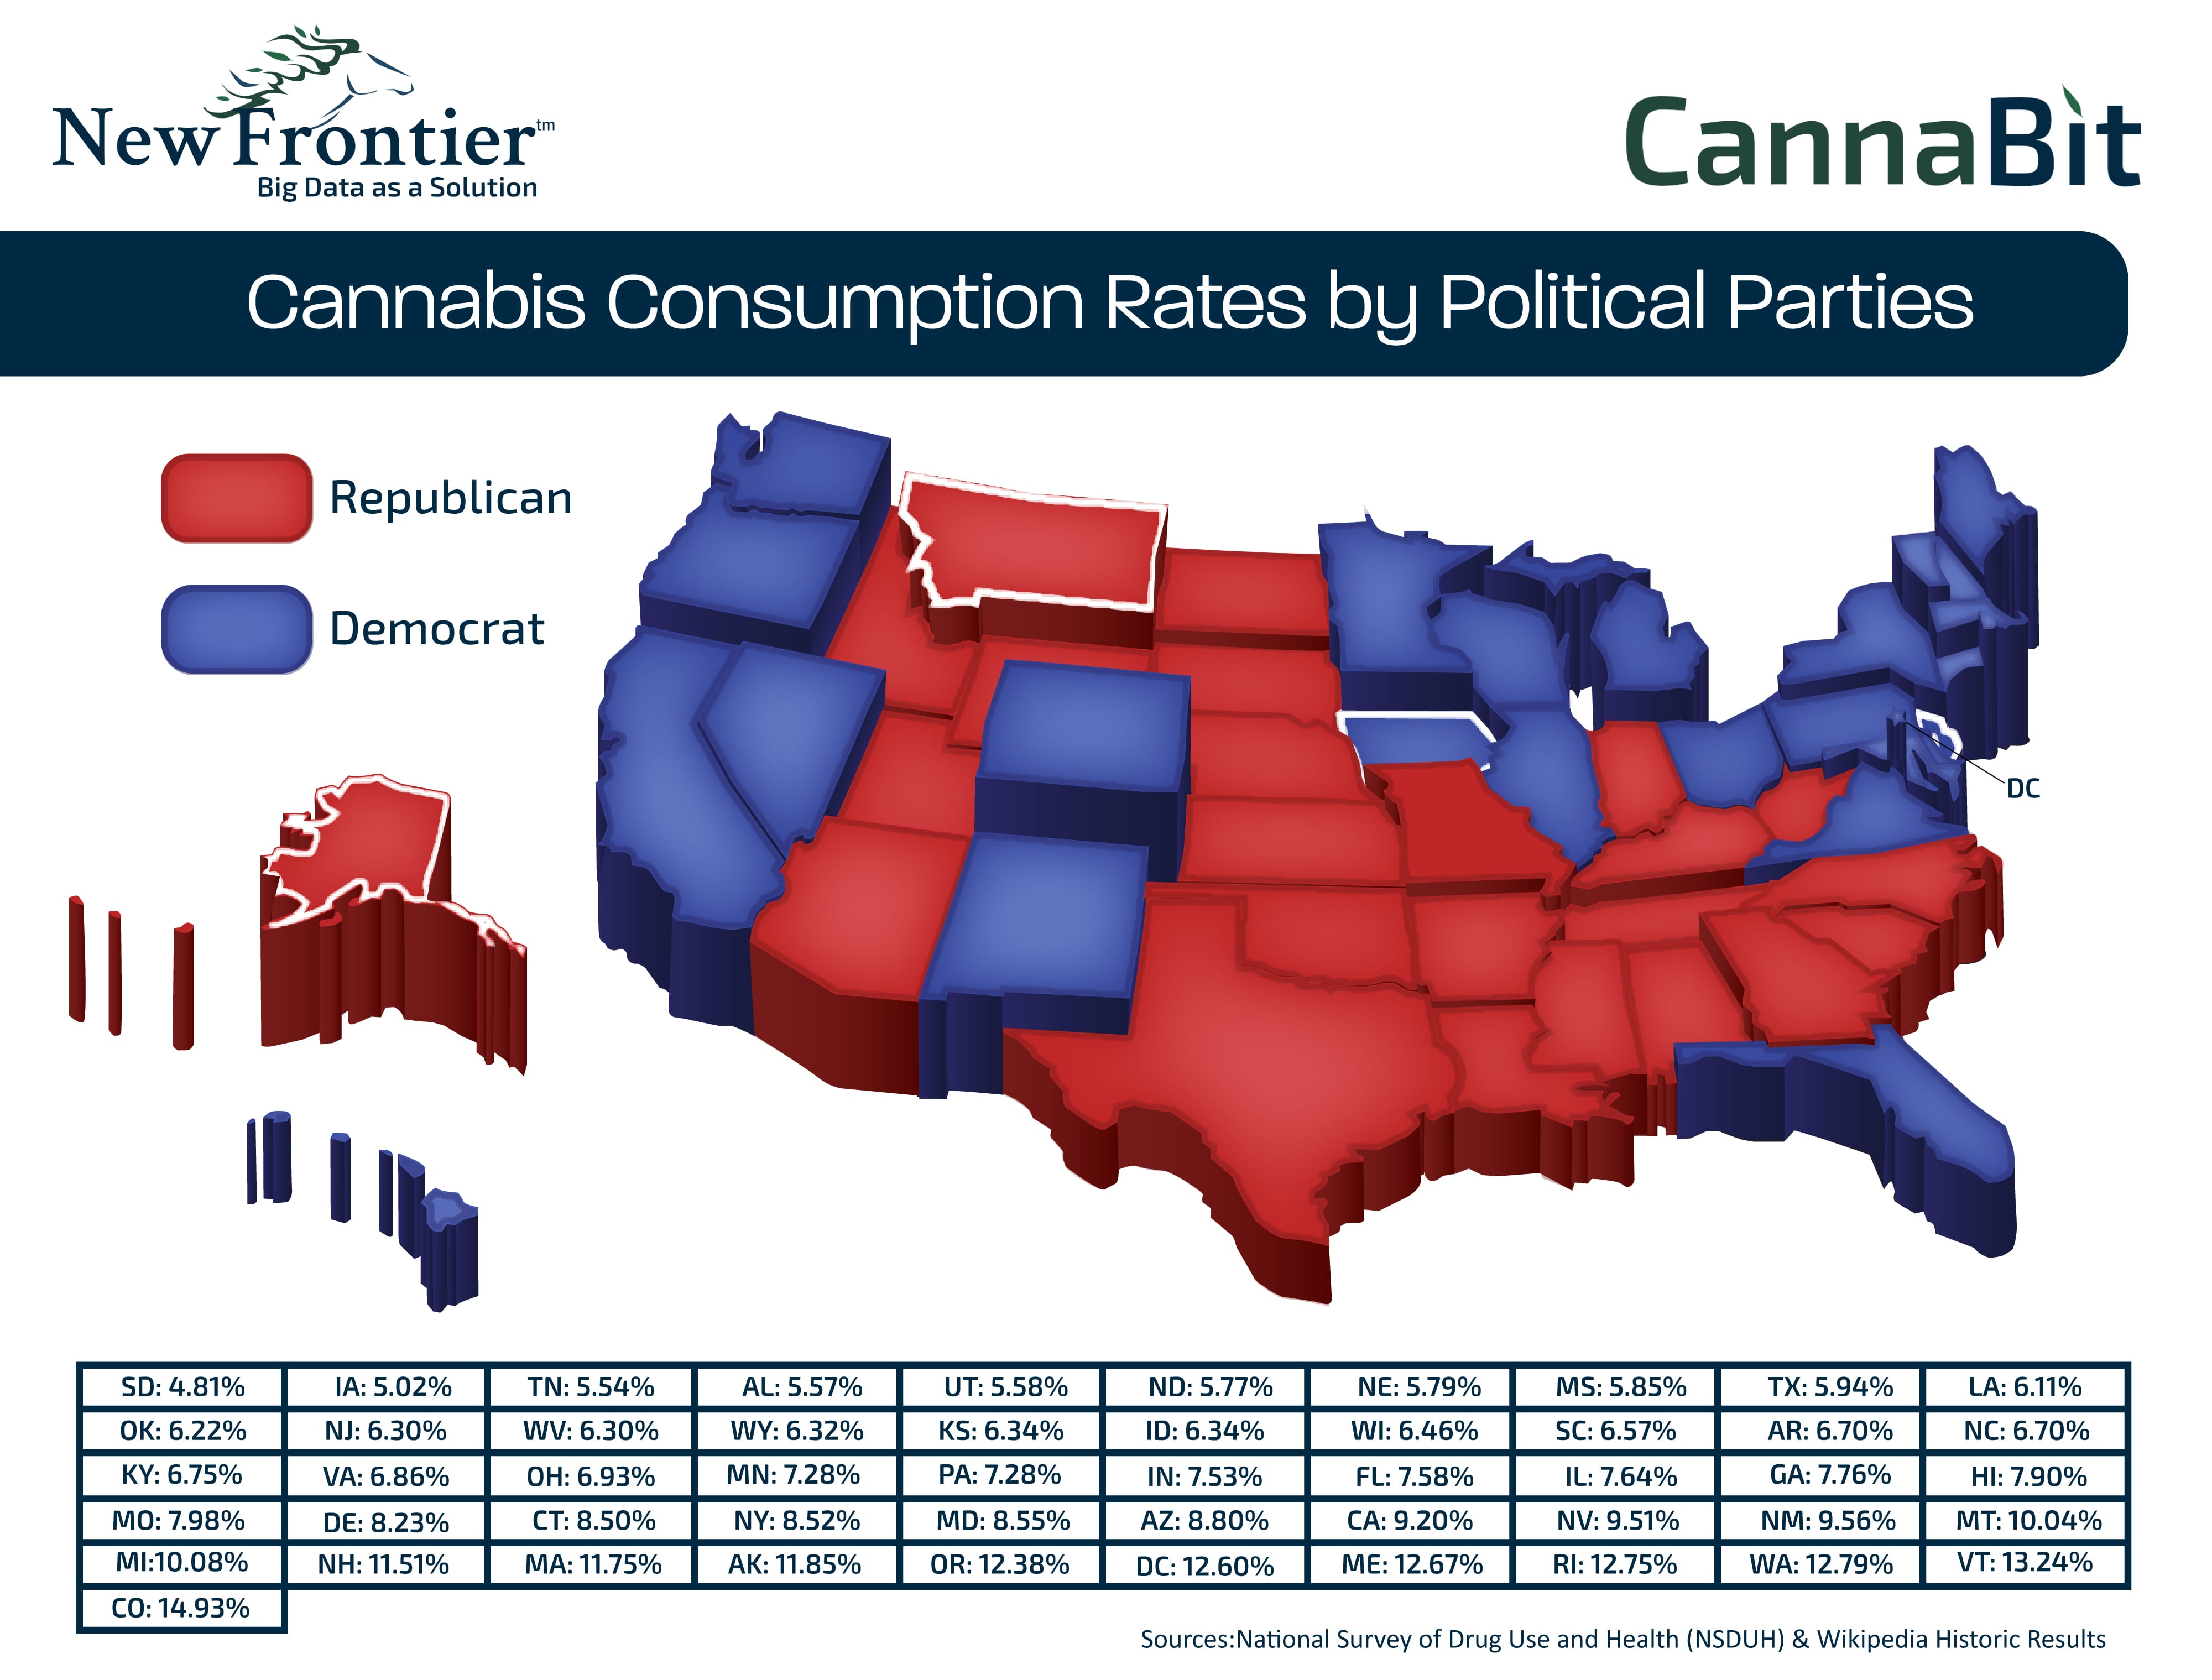 Cannabis / Marijuana Consumption Rates By Political Party - July 29, 2016